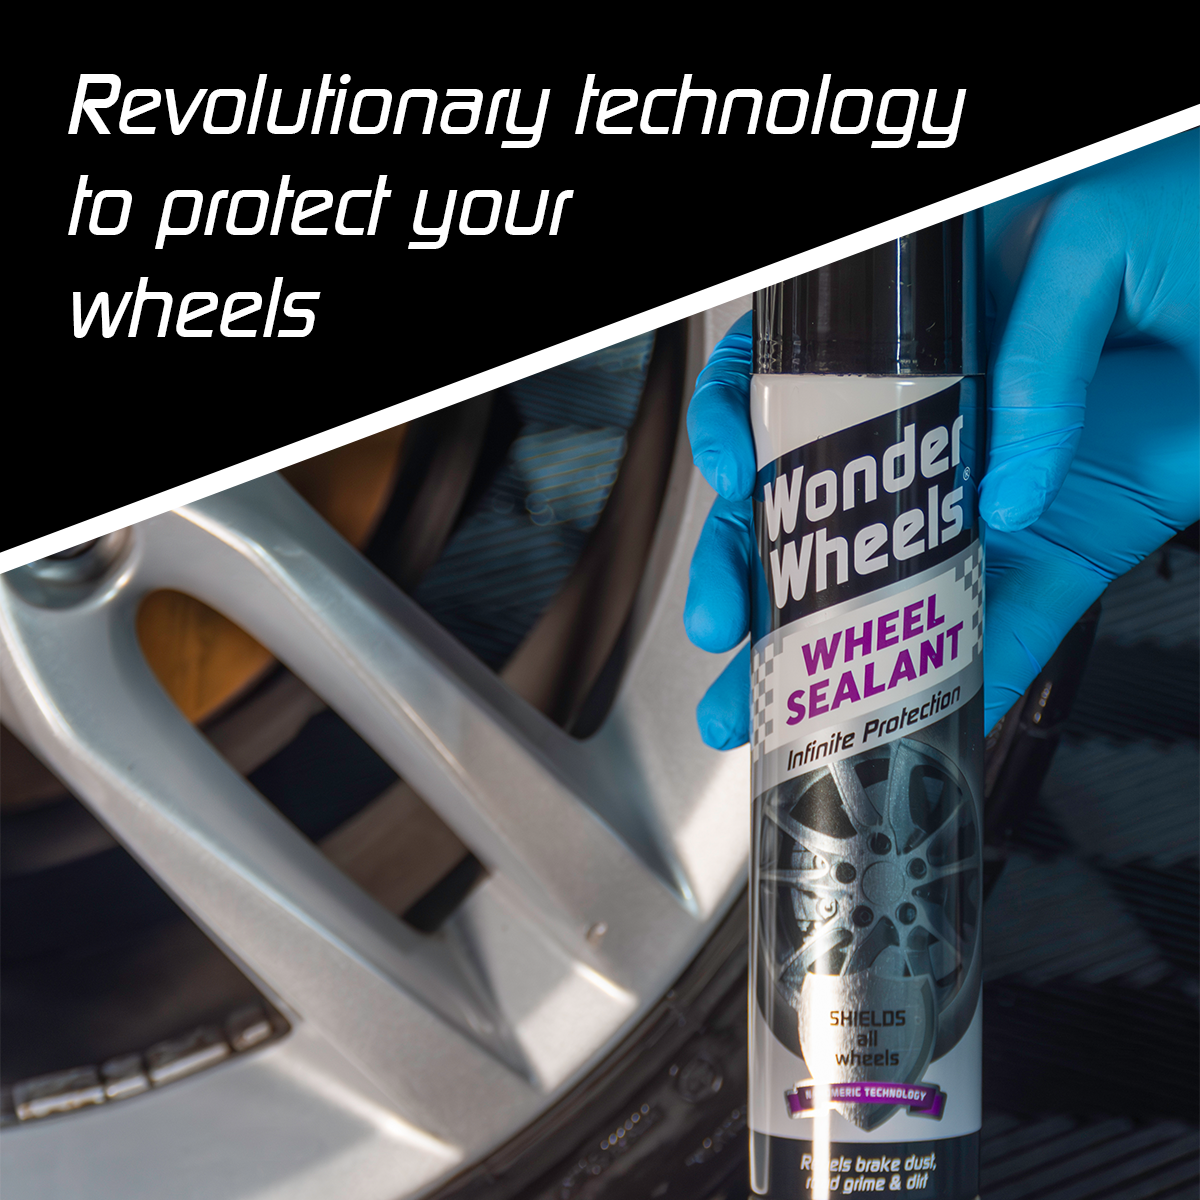 revolutionary technology to protect your wheels